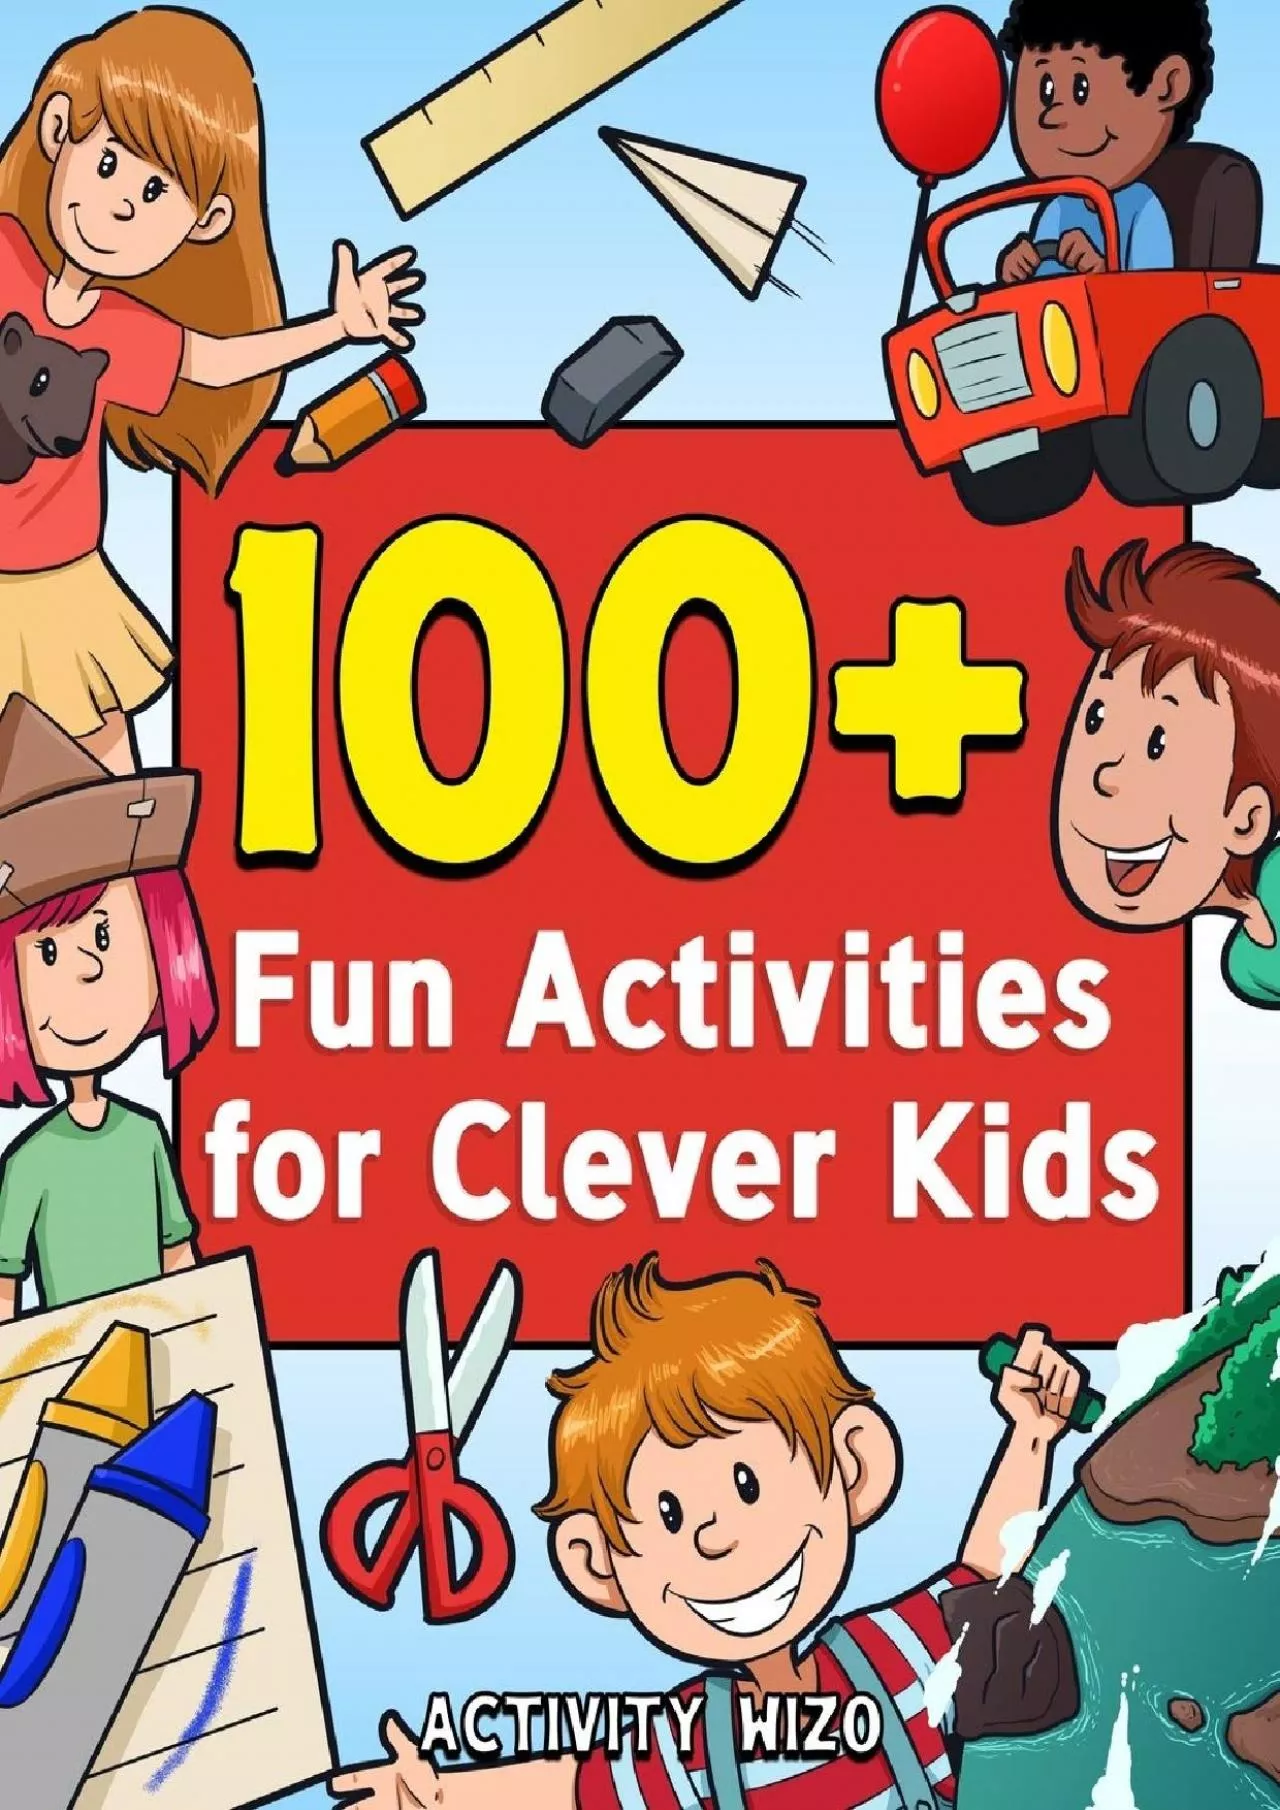 [PDF]-100+ Fun Activities for Clever Kids: Puzzles, Mazes, Coloring, Crafts, Dot to Dot,